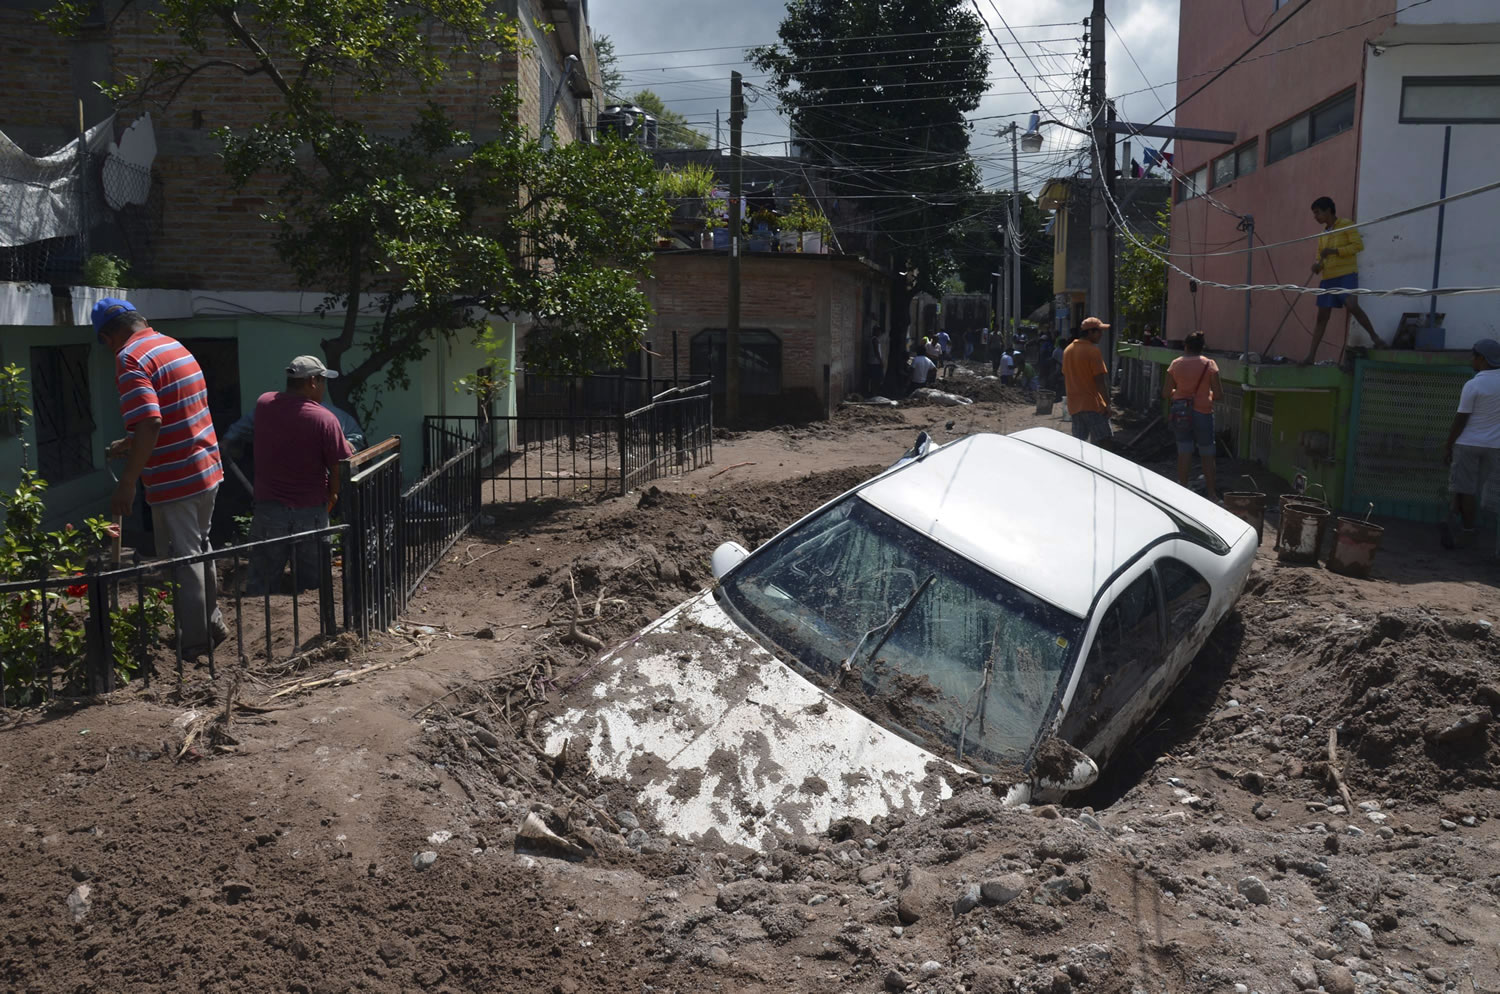 CORRECTS LAYS TO LIES-A car lies buried in mud after flooding triggered by Tropical Storm Manuel as residents try to clean up their neighborhood in Chilpancingo, Mexico, Thursday, Sept. 19, 2013.  Manuel, the same storm that devastated Acapulco, gained hurricane force and rolled into the northern state of Sinaloa on Thursday before starting to weaken.